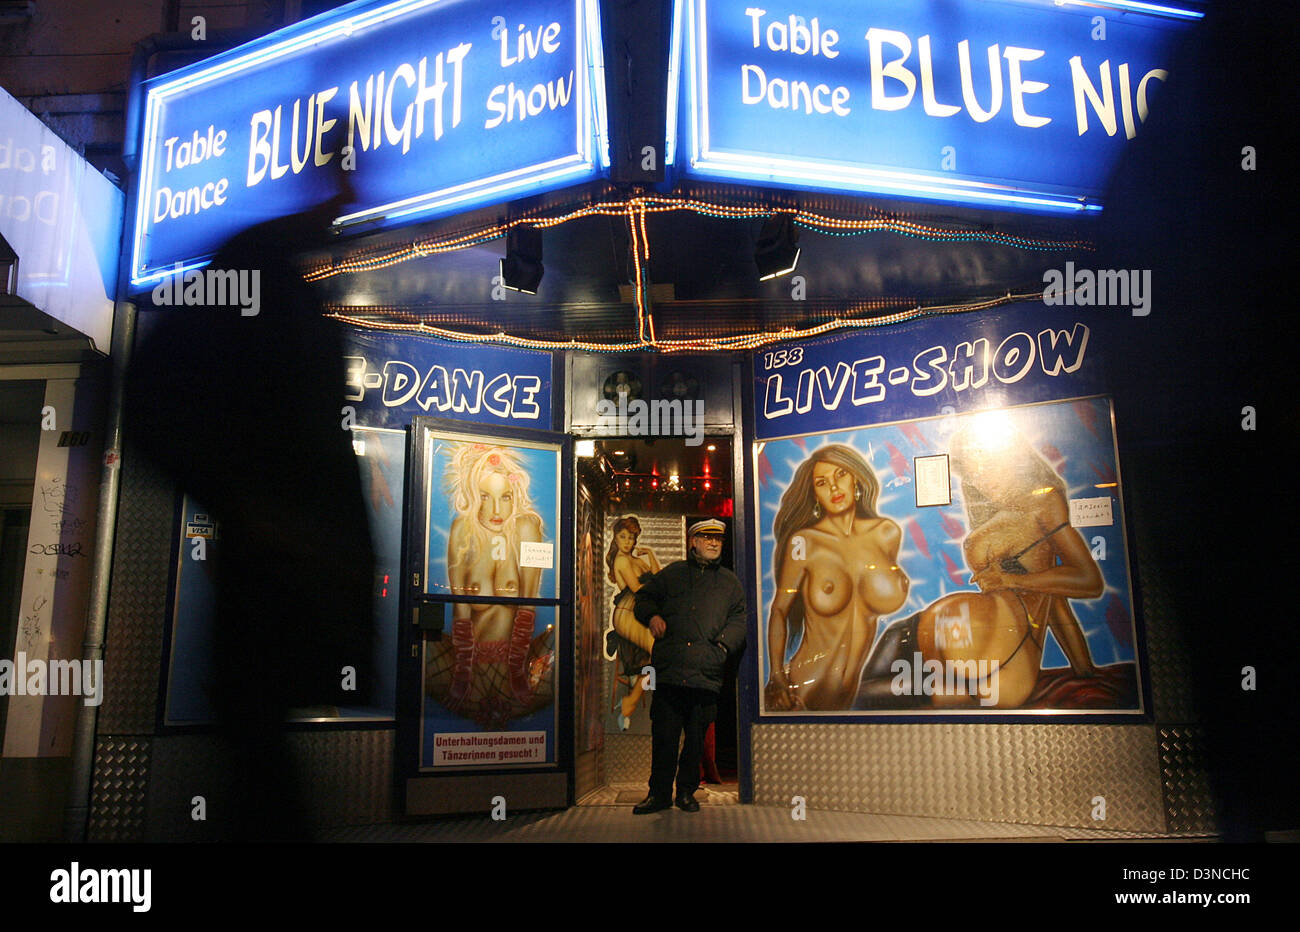 A doorman stands in the entrance to a tabledance club on the famous Reeperbahn amusement street in Hamburg, Germany, Tuesday night, 28 March 2006. The famous Reeperbahn is considered the longest amusement street in the world. Photo: Kay Nietfeld Stock Photo